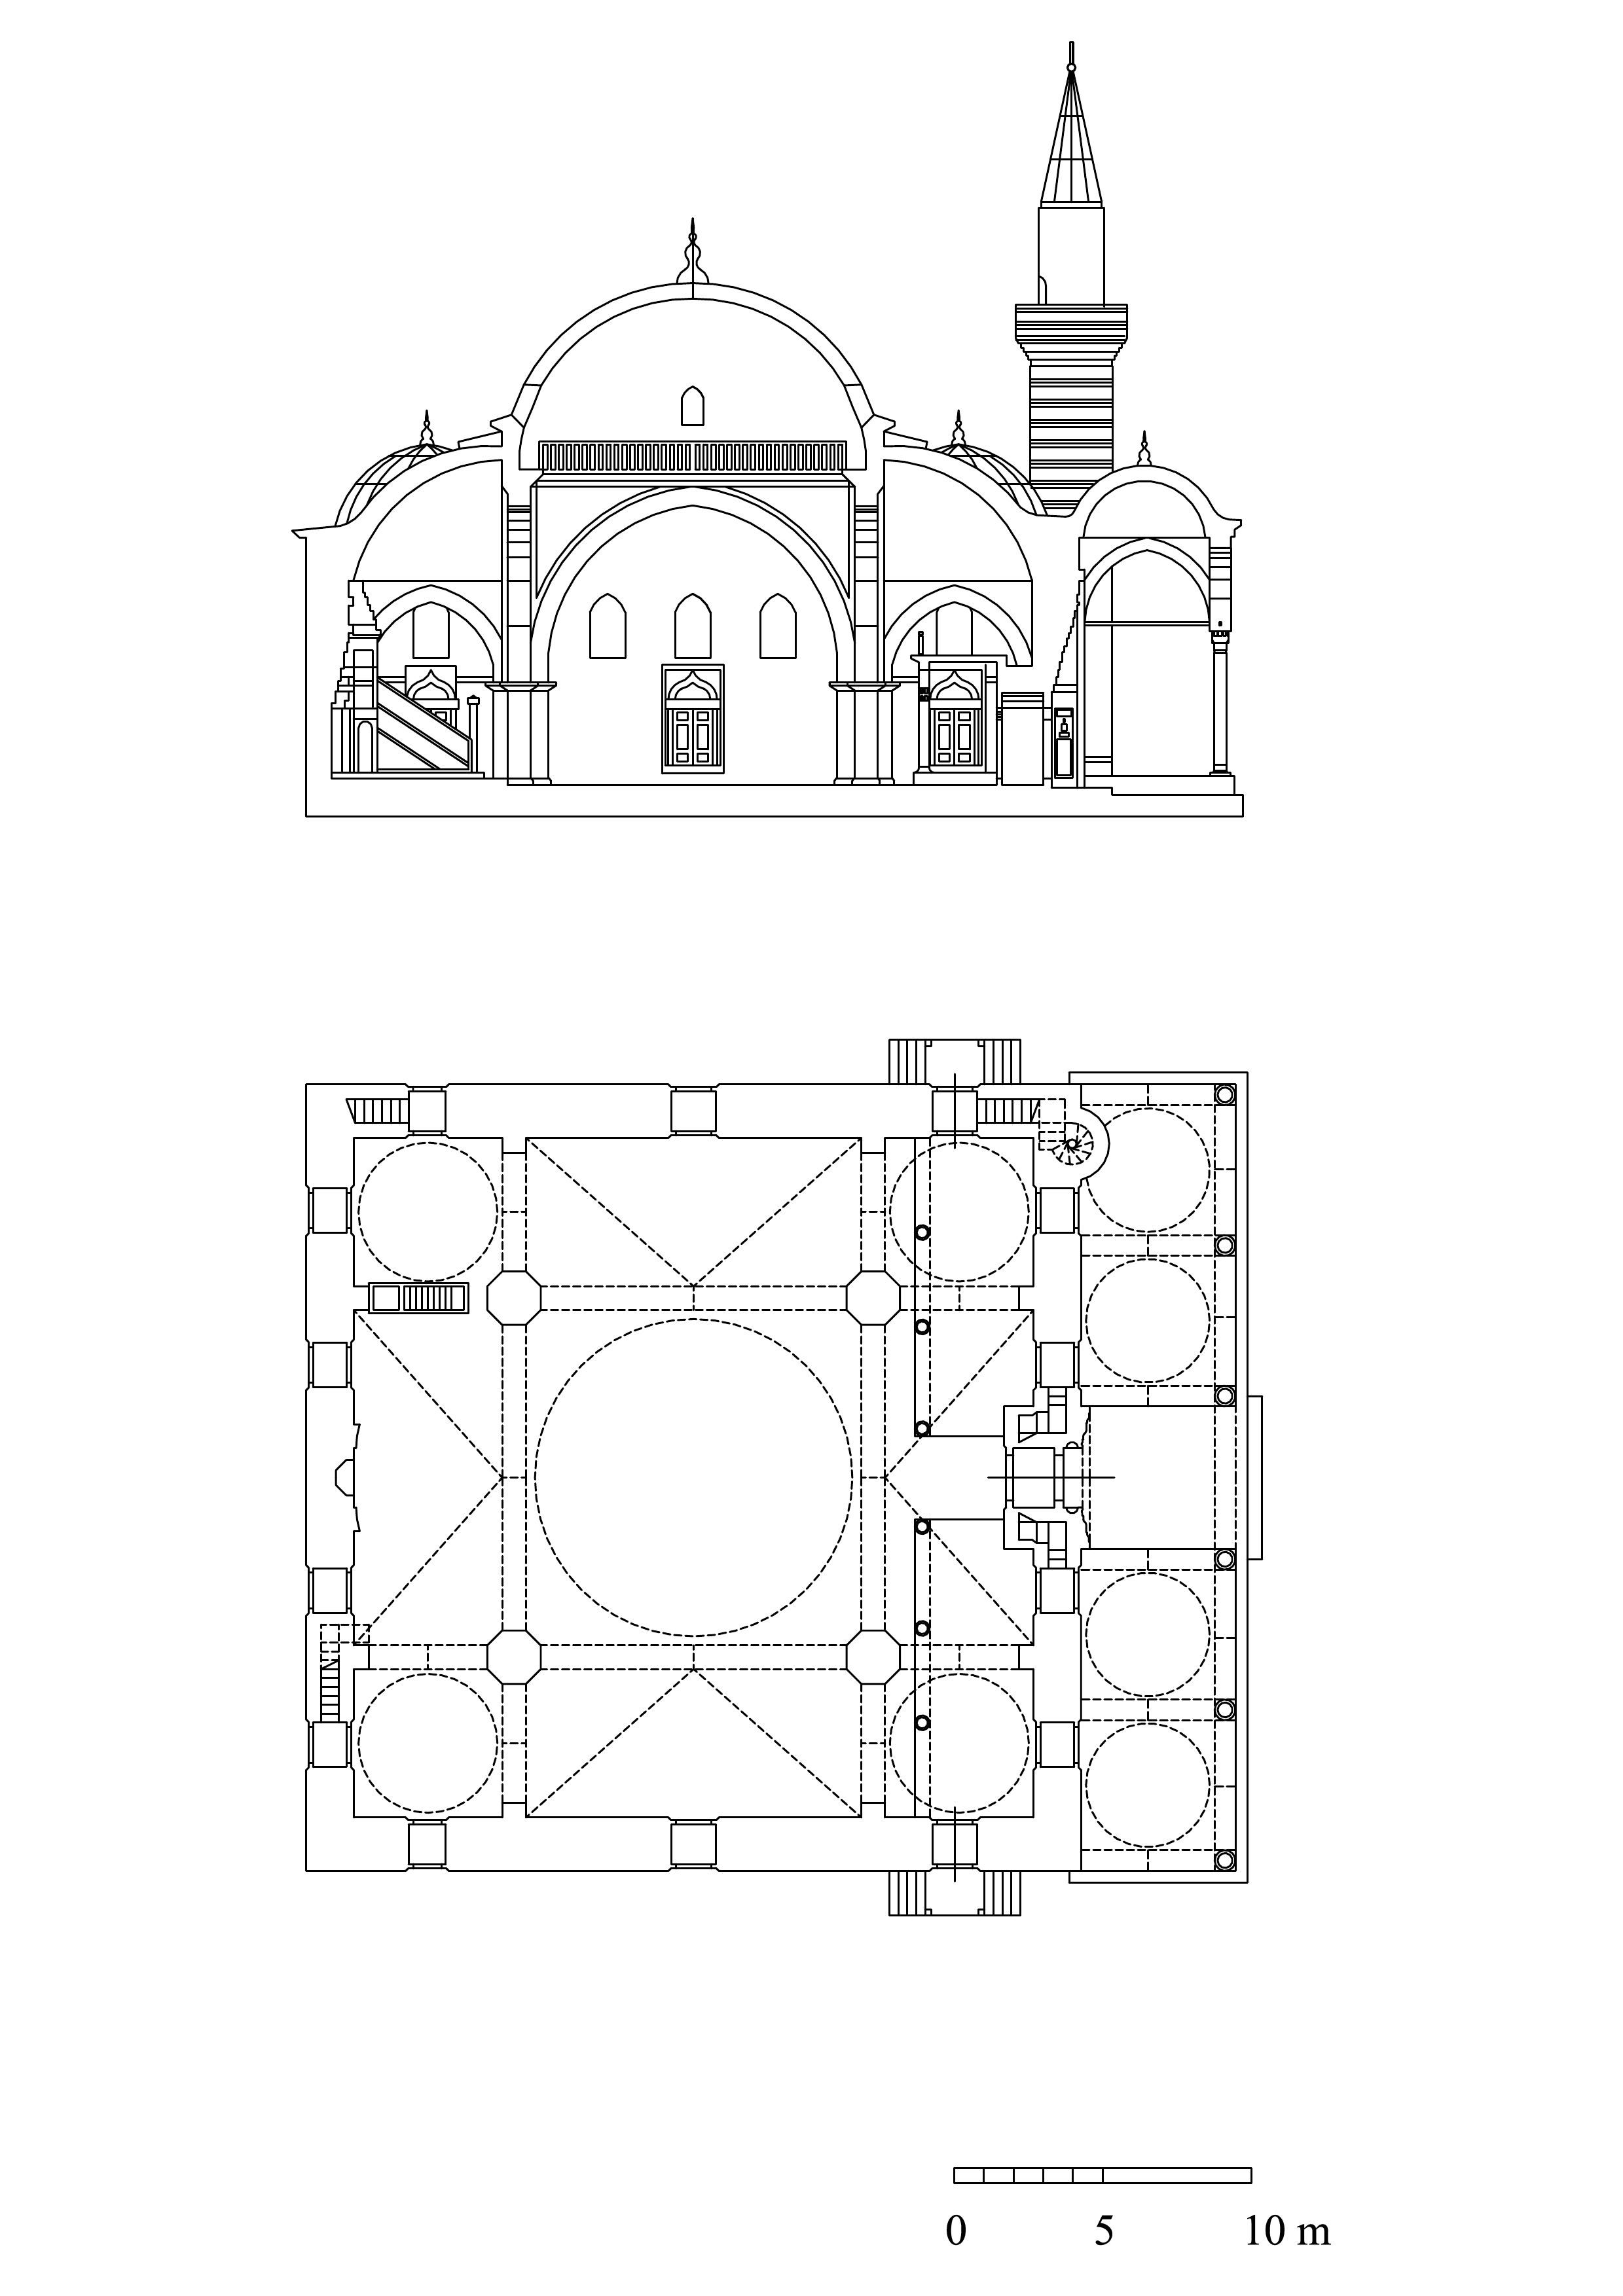 Lala Mustafa Paşa Camii - Floor plan and cross-section. DWG file in AutoCAD 2000 format. Click the download button to download a zipped file containing the .dwg file.